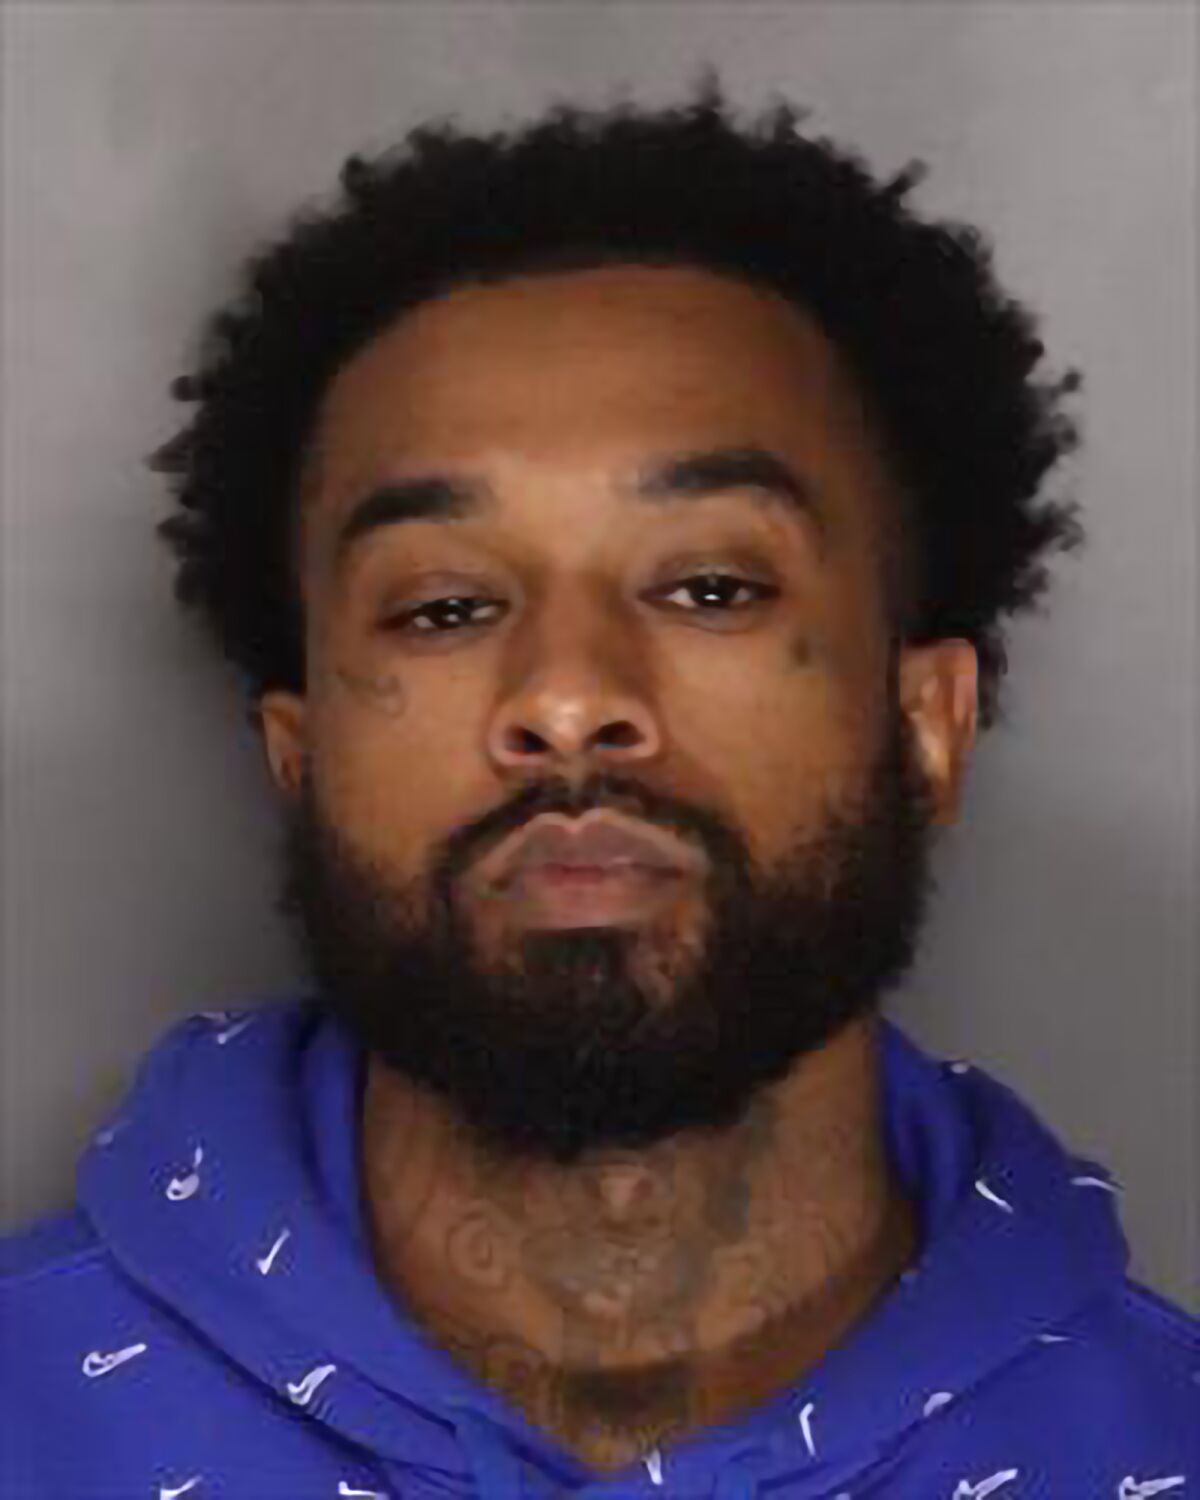 Mtula Payton, who is wanted on multiple felony warrants, including domestic violence and gun charges.